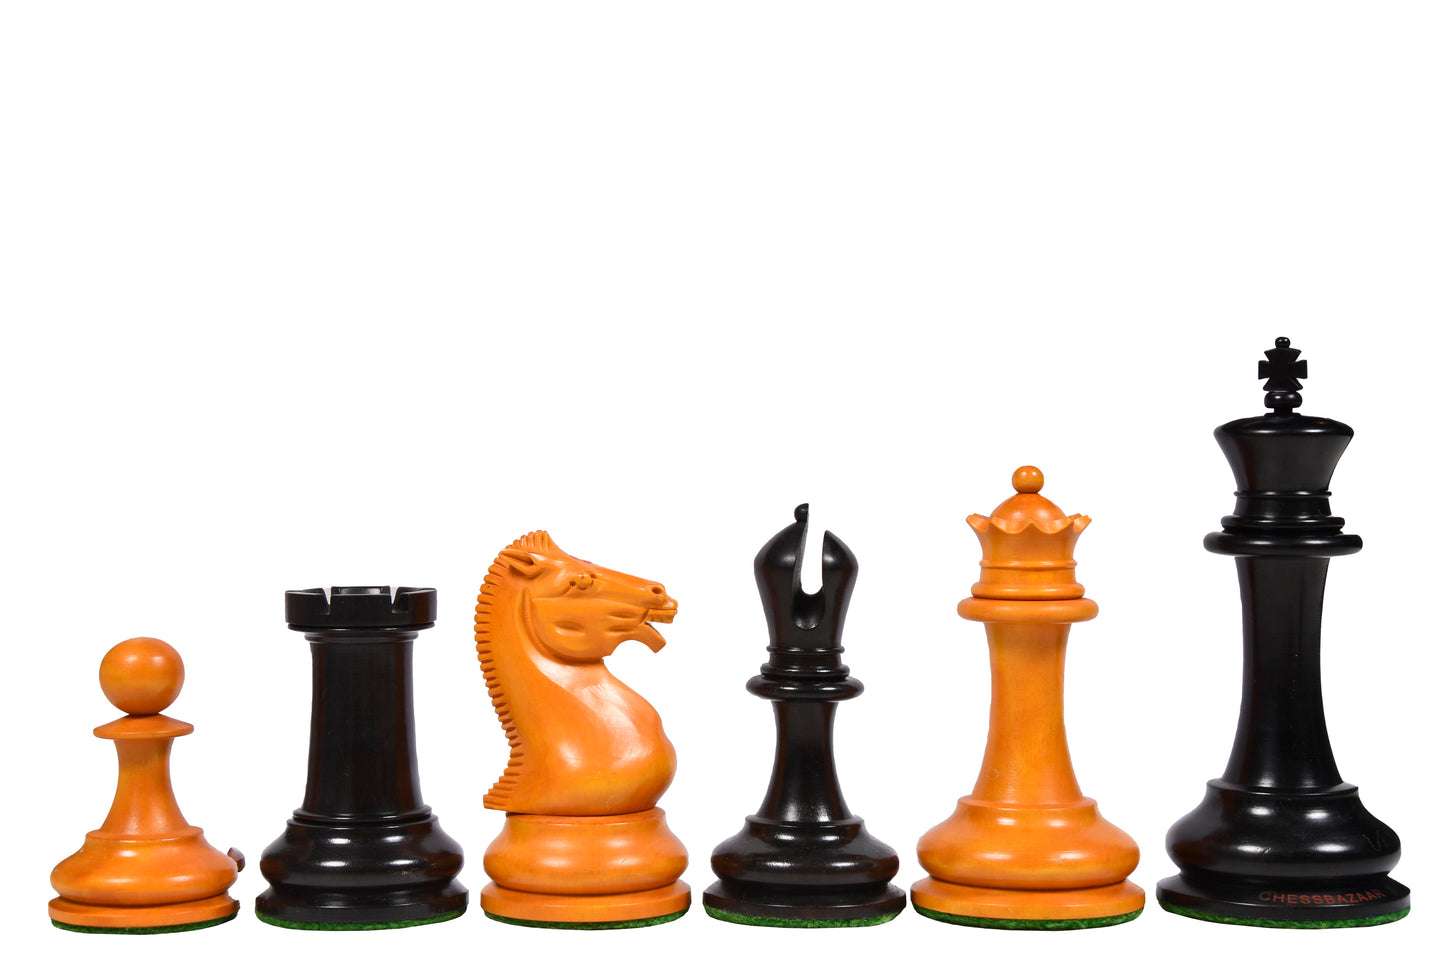 Reproduced Circa 1852 Harrwitz Staunton Pattern Chess Pieces in Ebony / Antiqued Box Wood with King Side Stamping - 4.5" King